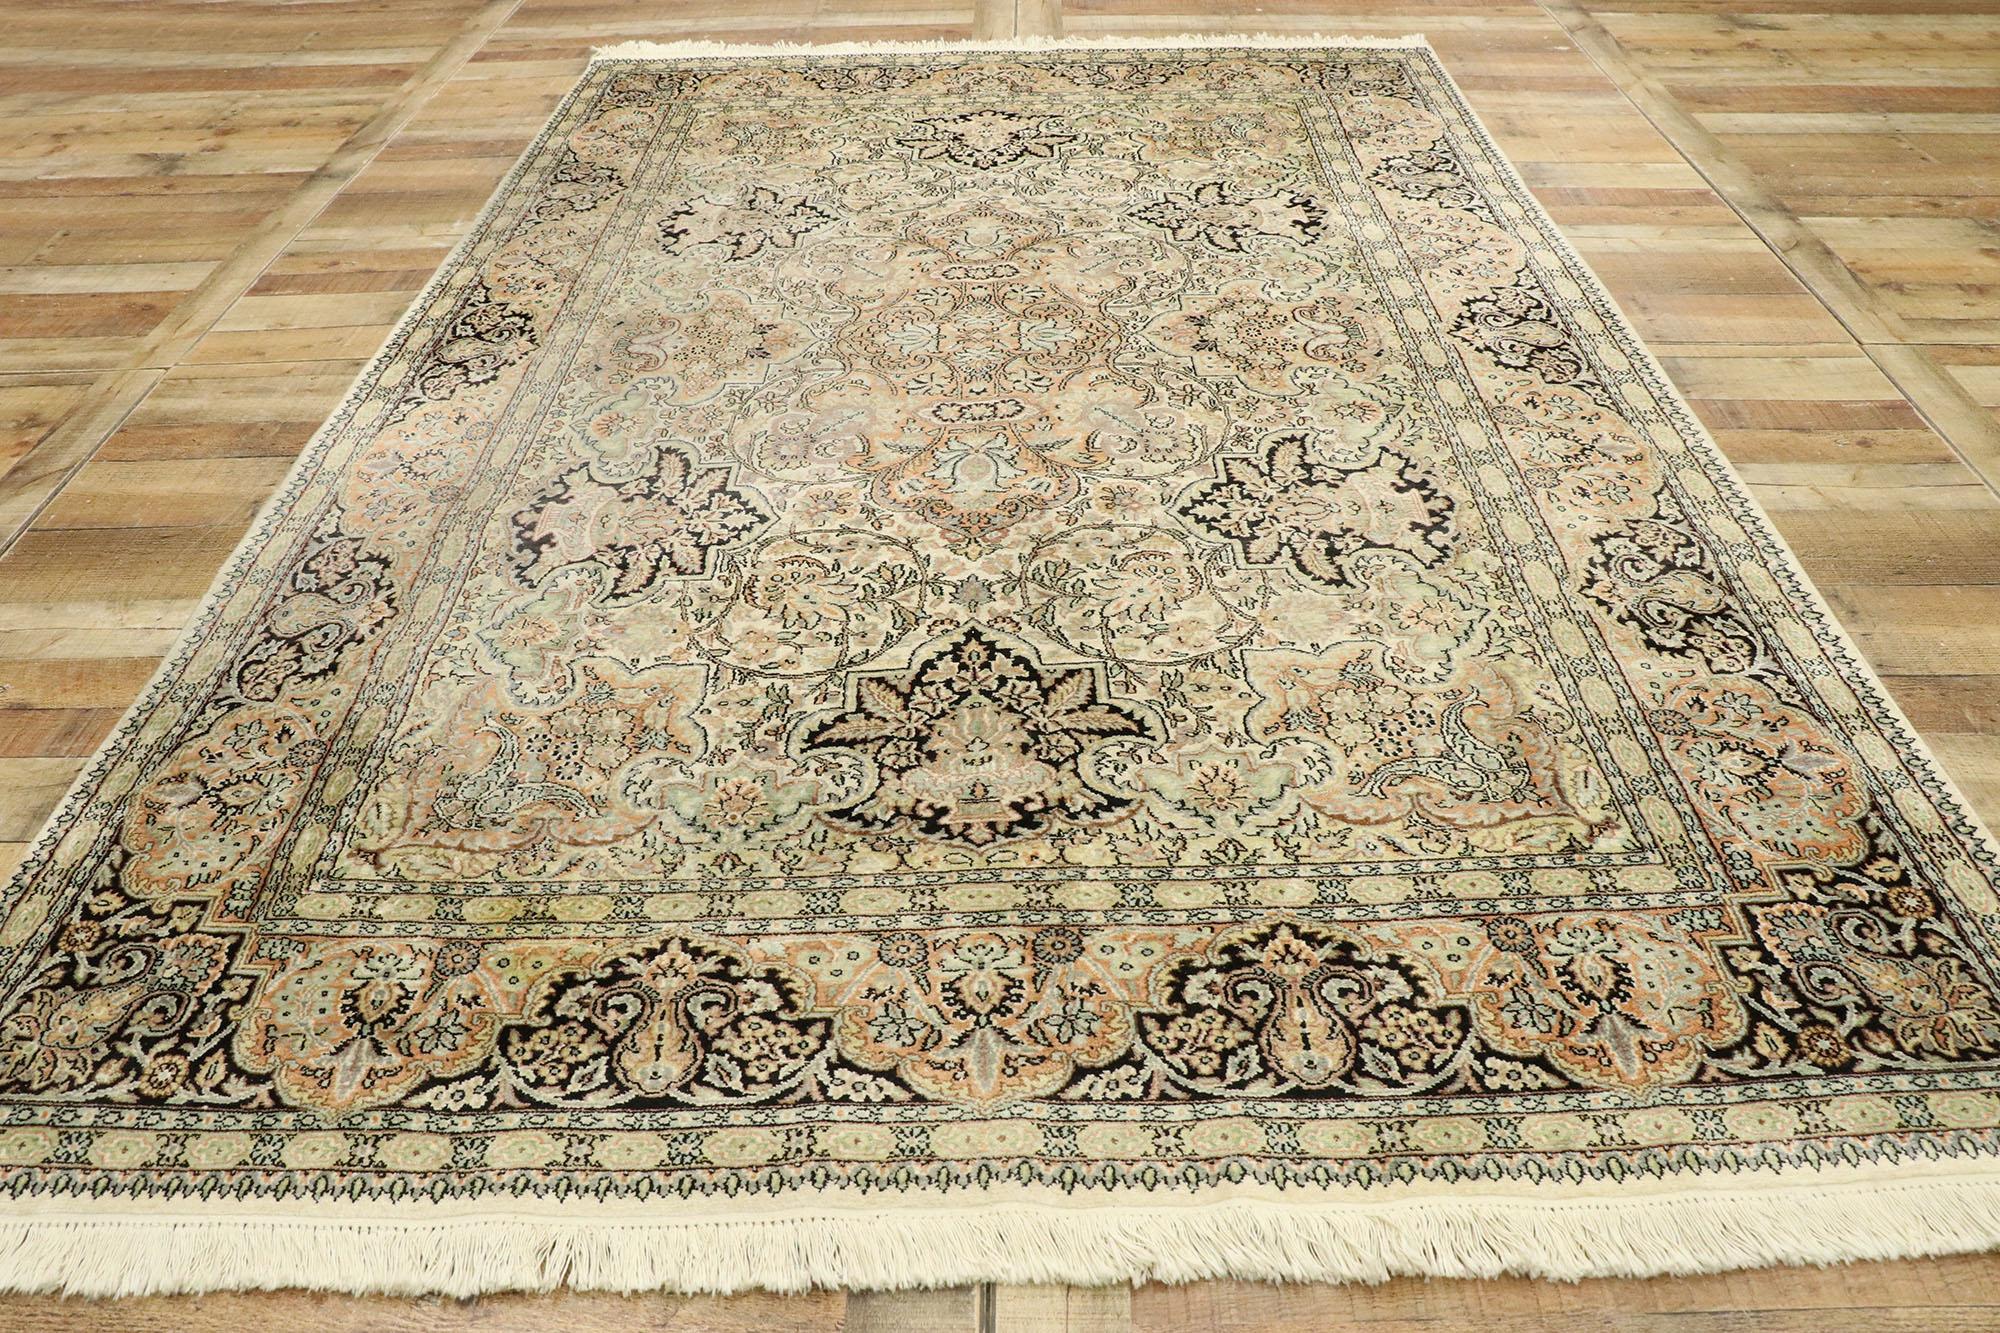 Vintage Indian Kashmir Rug with Art Nouveau Rococo Style In Good Condition For Sale In Dallas, TX